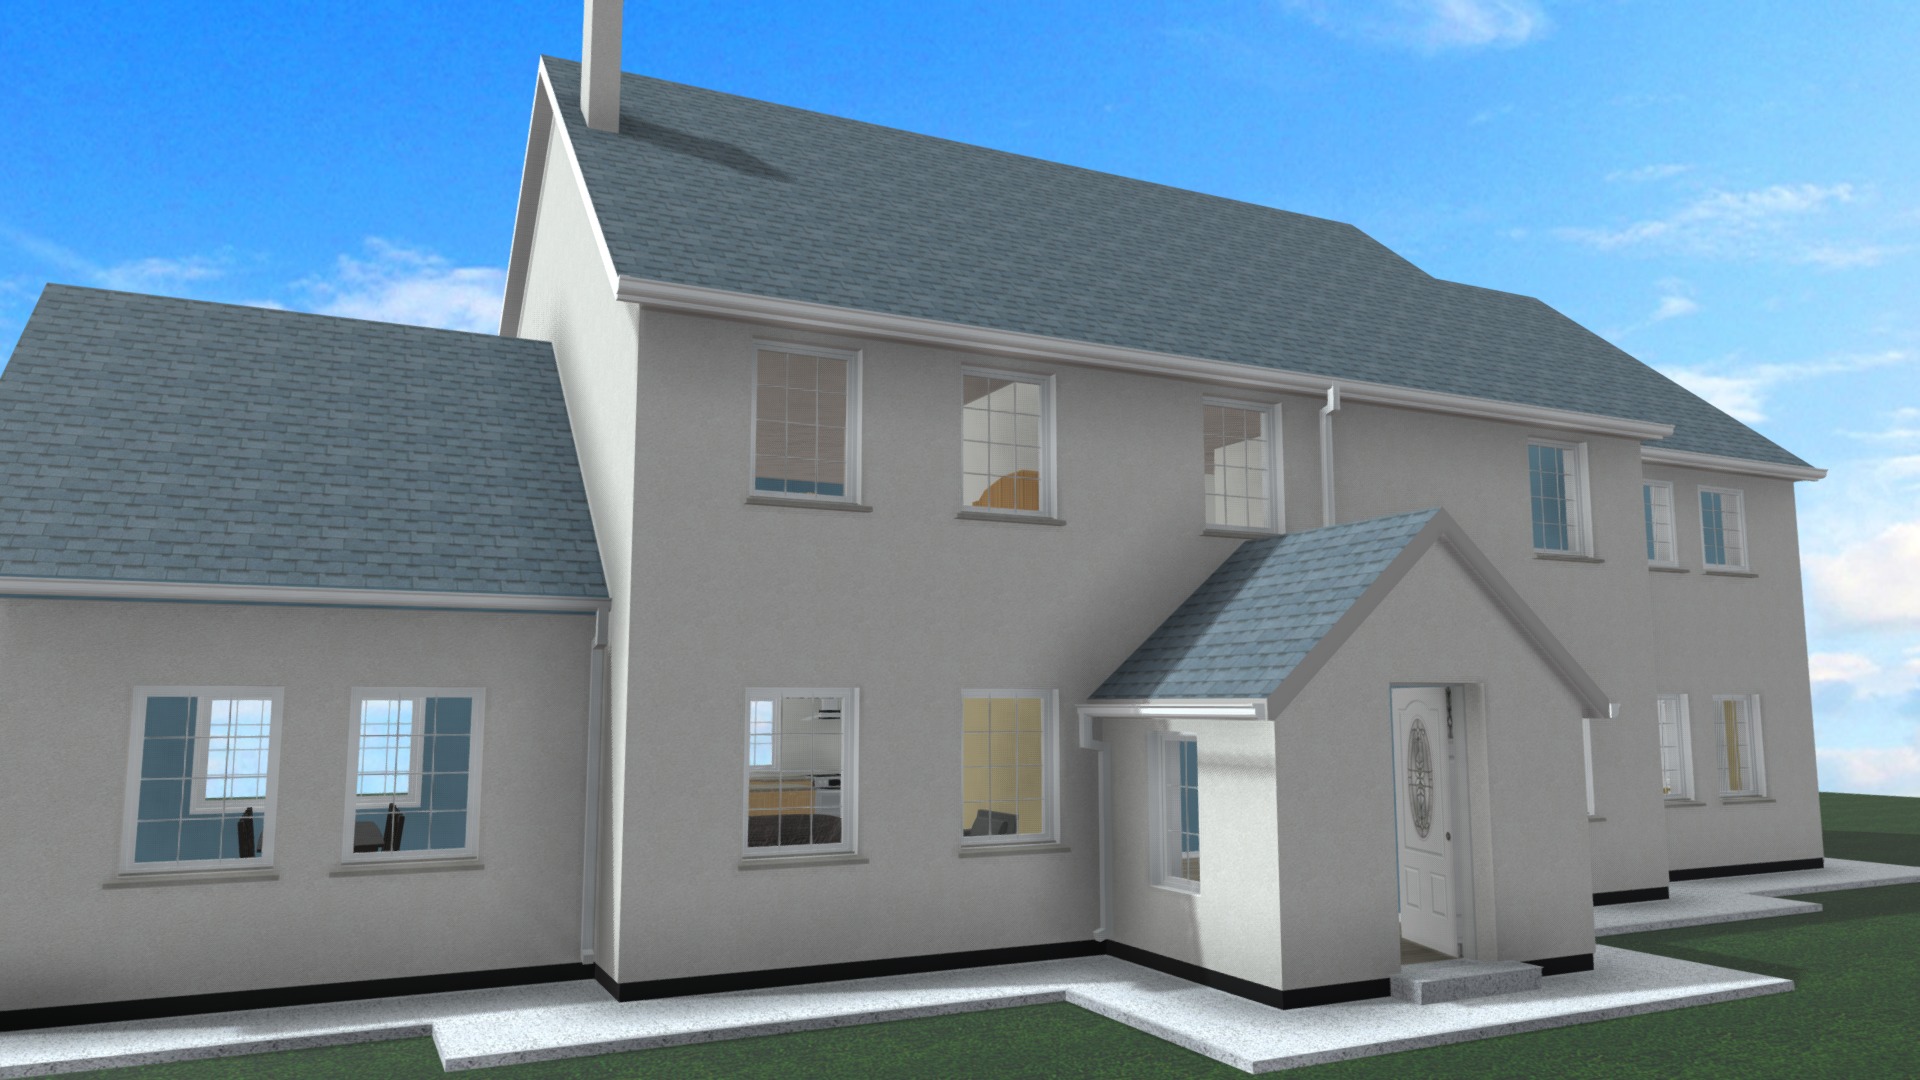 3D model Large 2 Storey House - This is a 3D model of the Large 2 Storey House. The 3D model is about a house with a driveway.